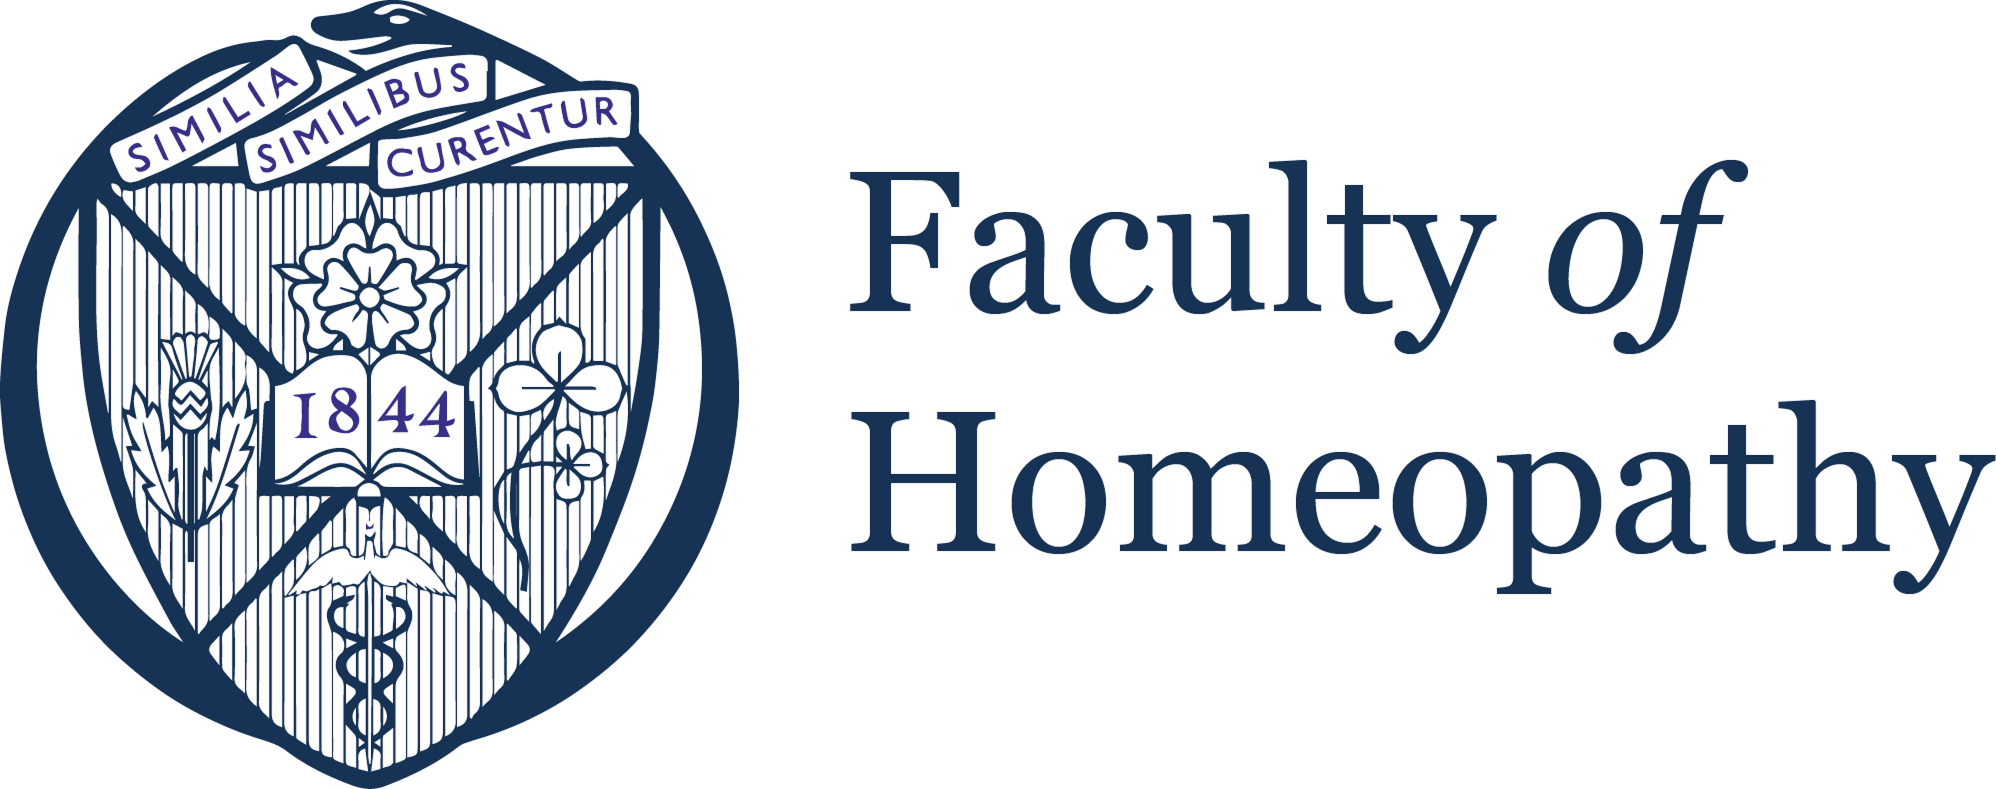 Faculty of Homeopathy